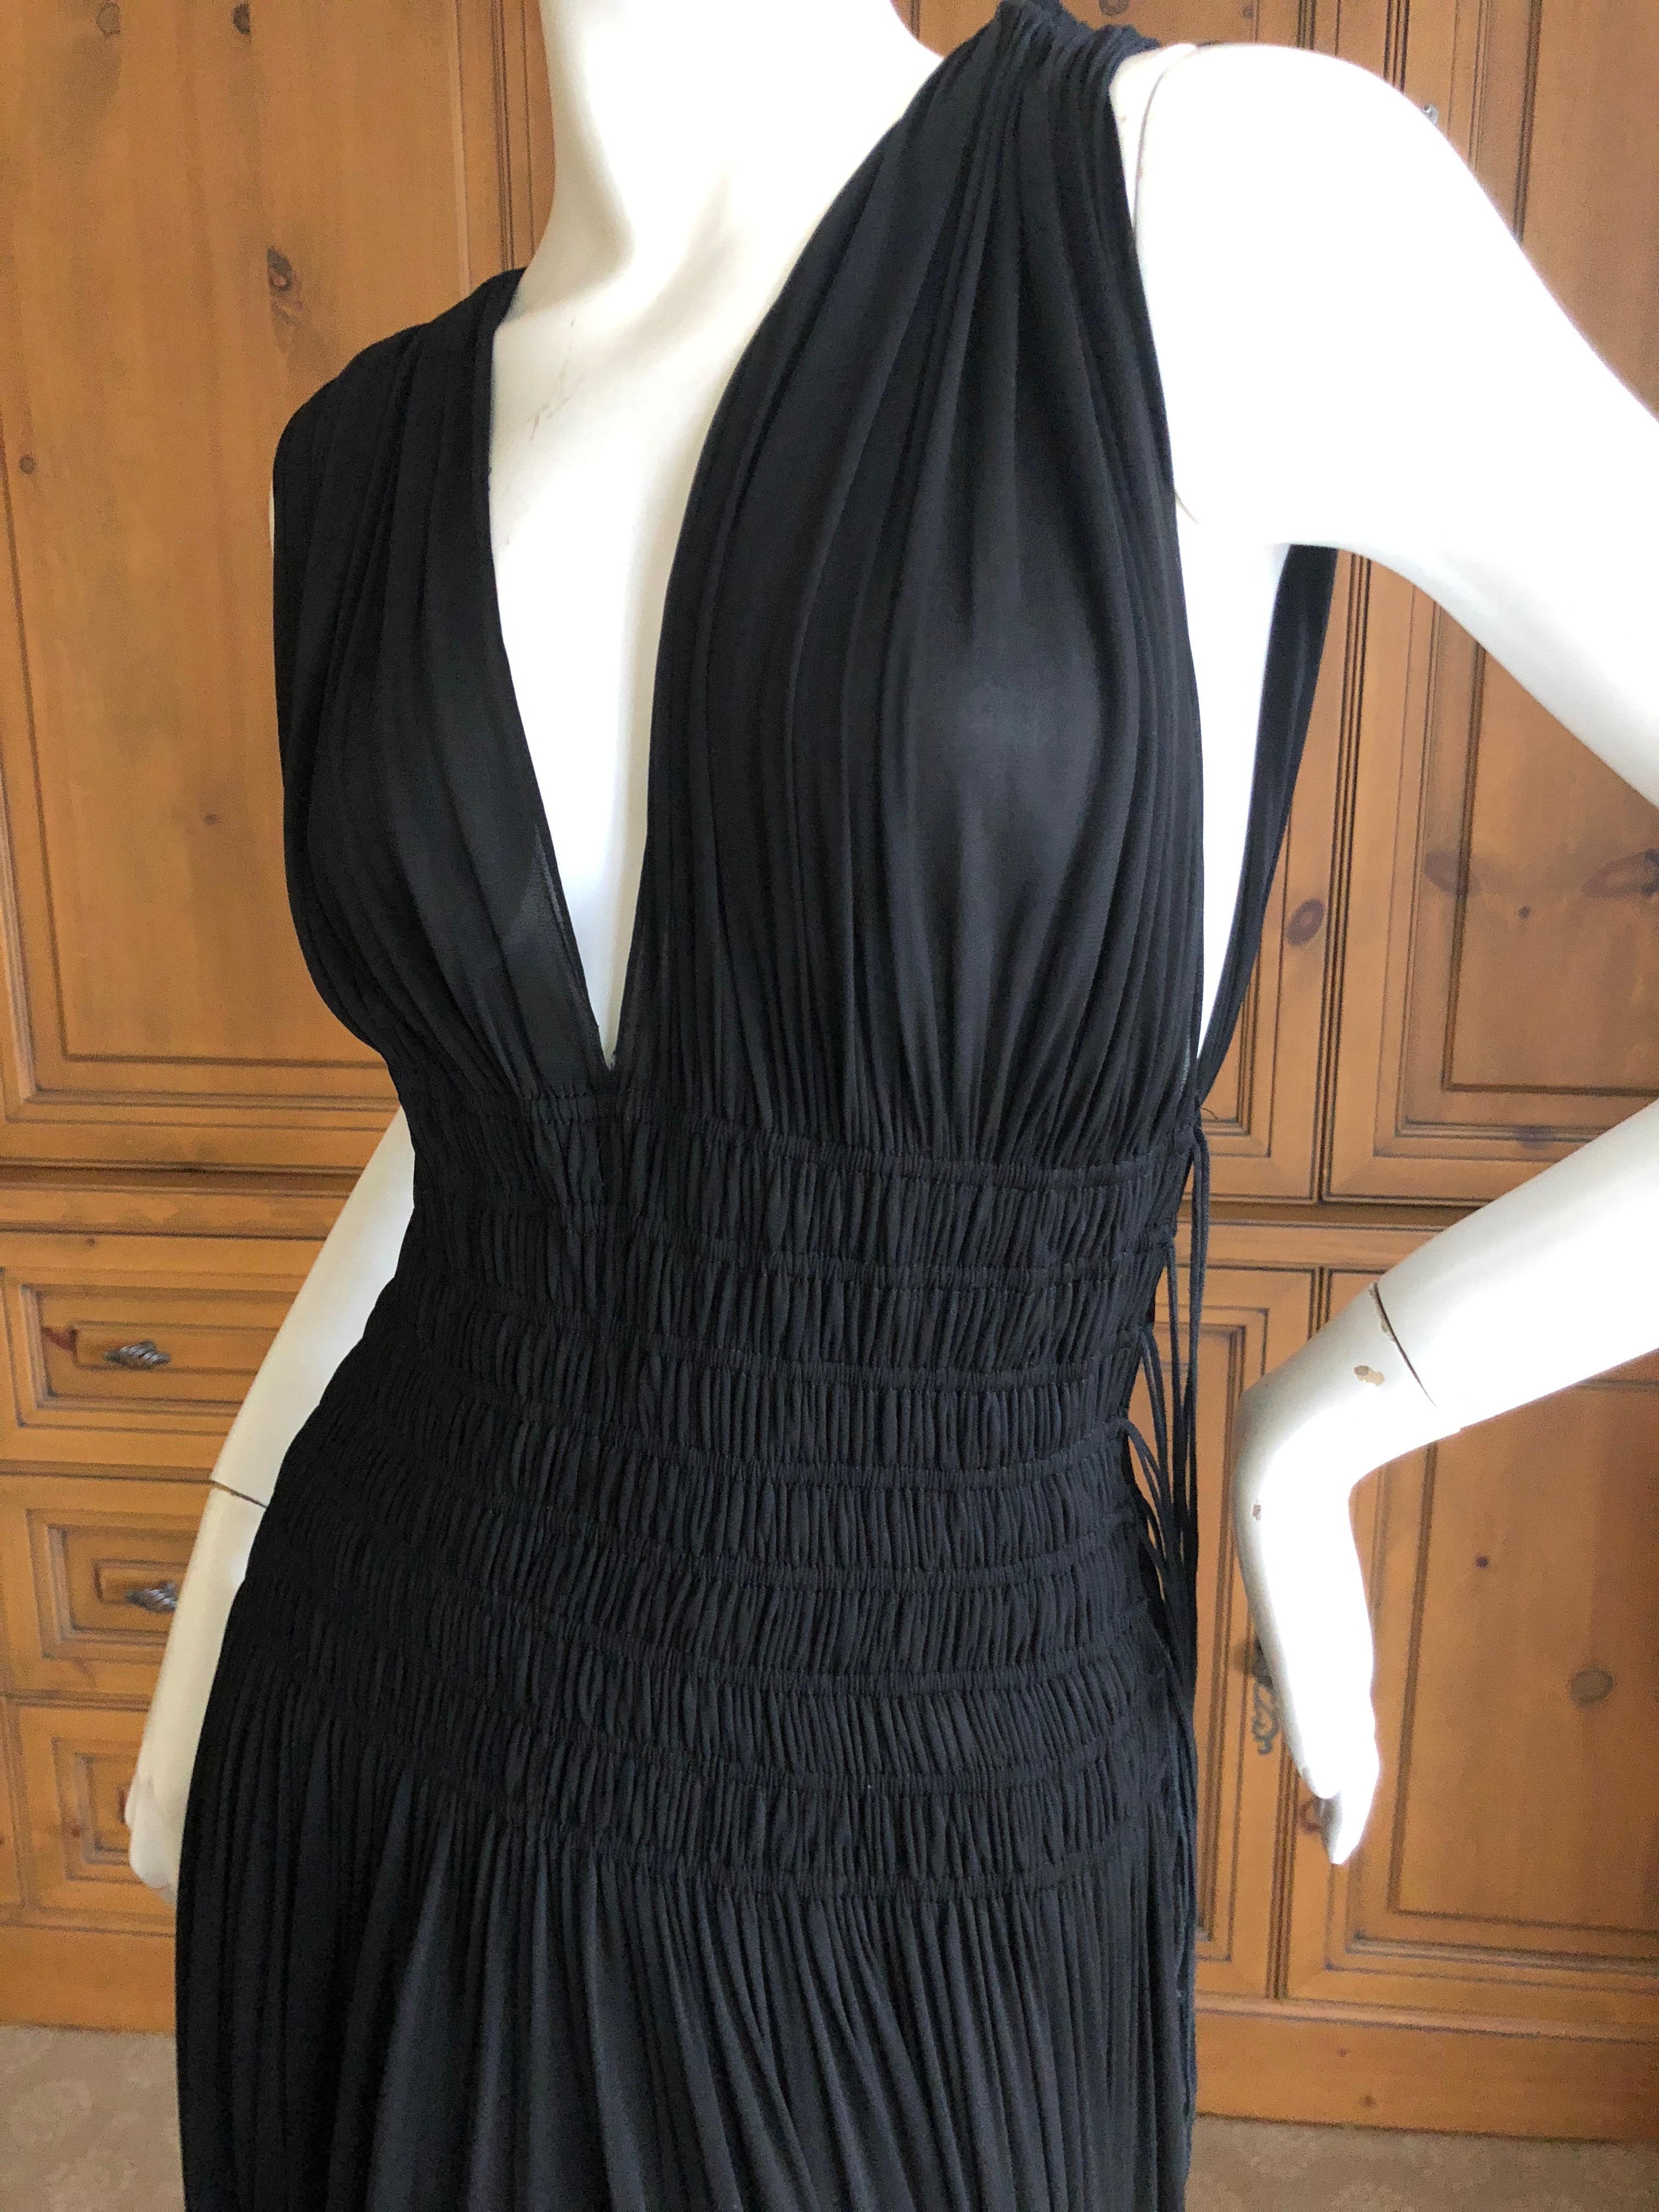 Azzedine Alaia Vintage Black Pleated Goddess Gown from Autumn 1991  For Sale 1